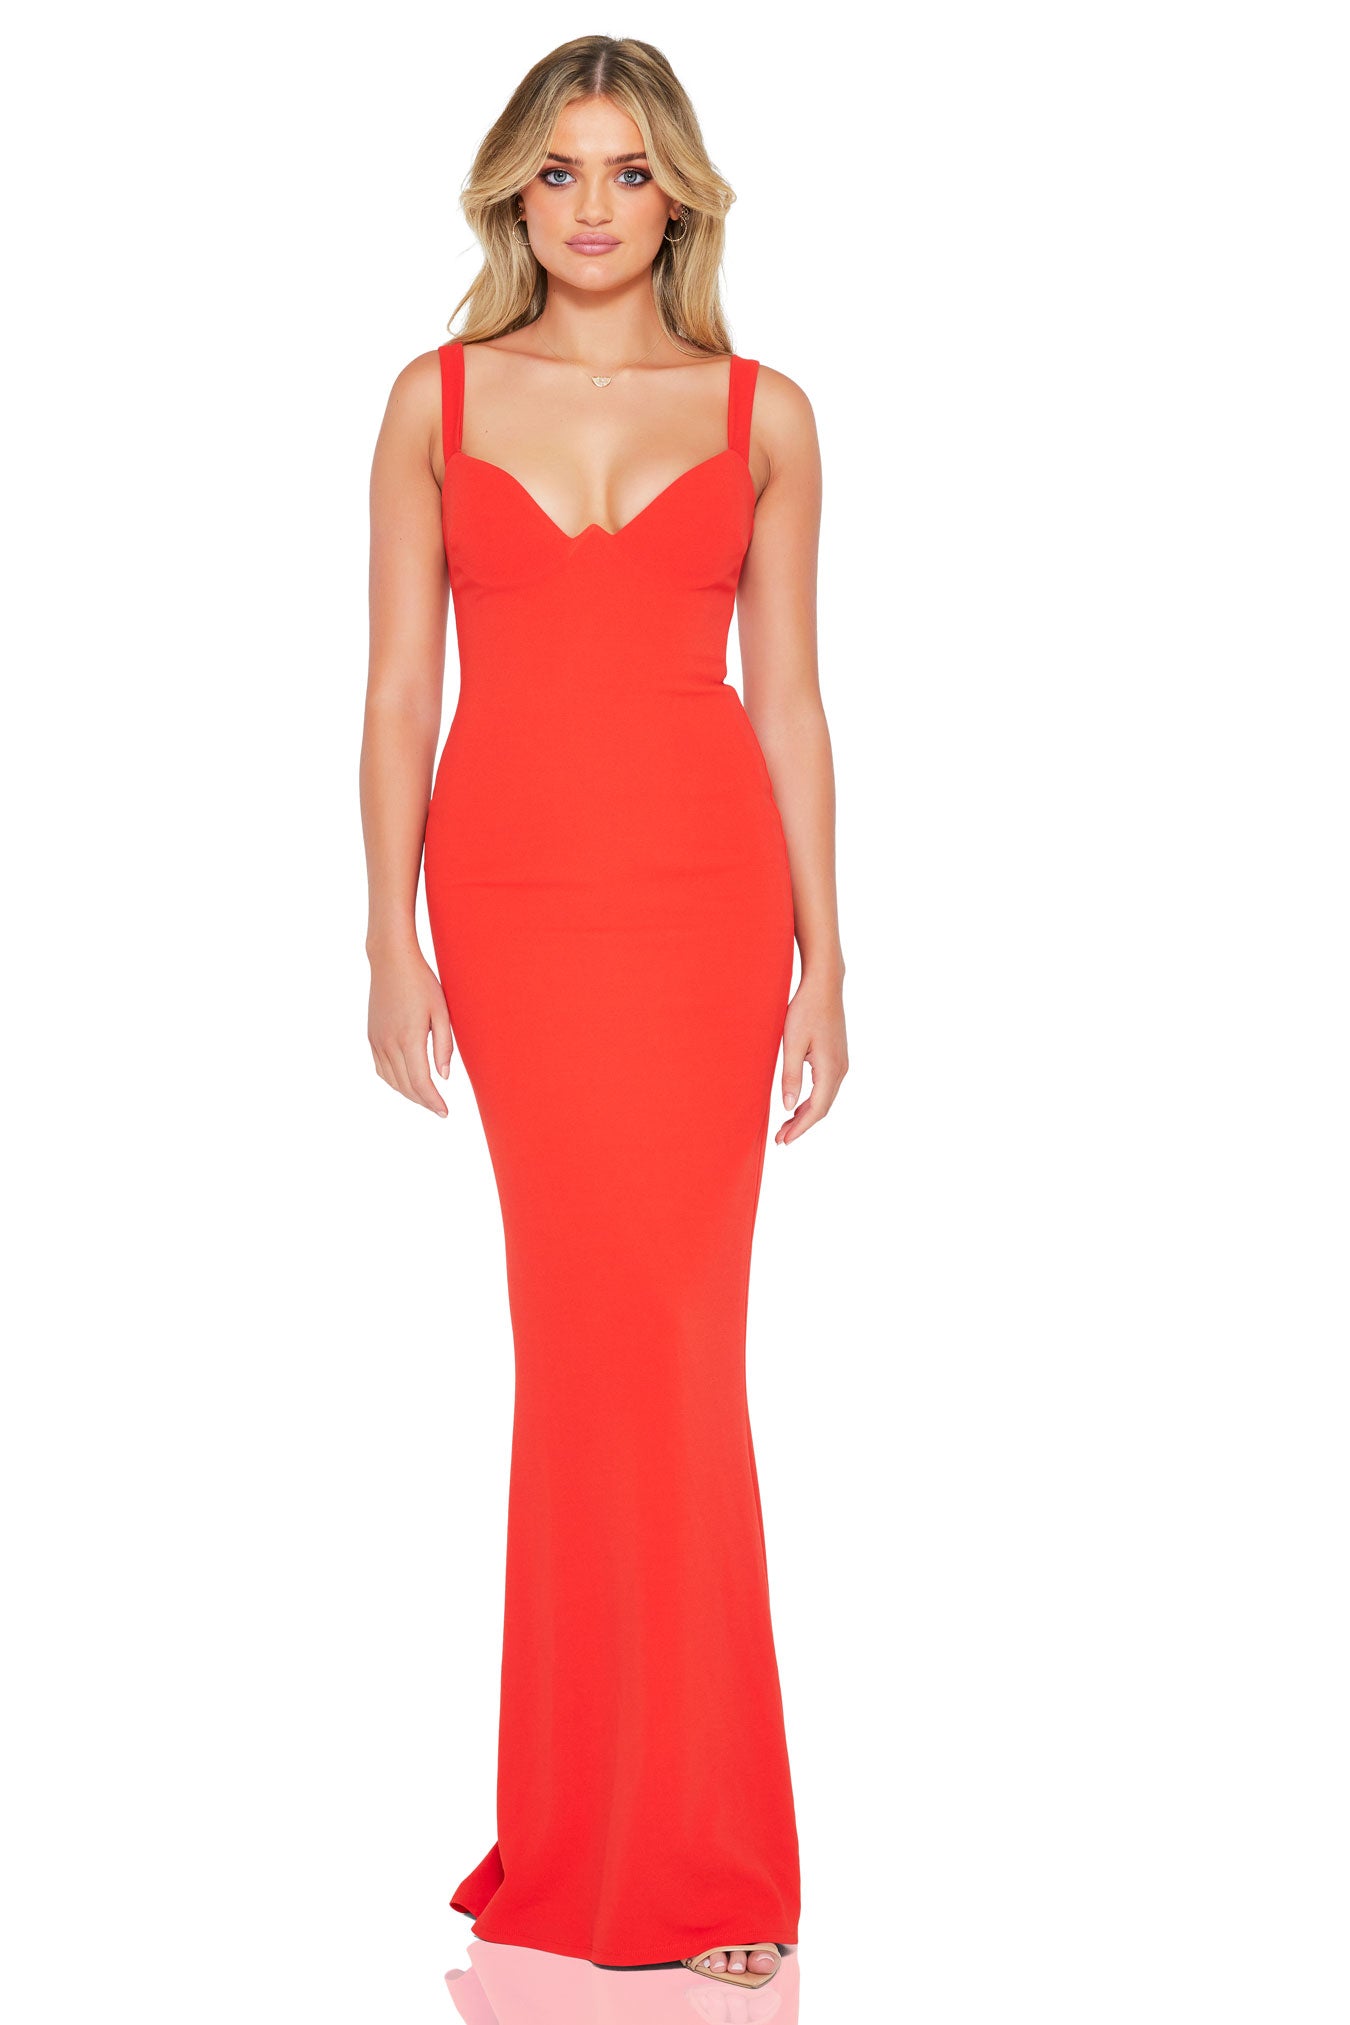 ROMANCE GOWN RED